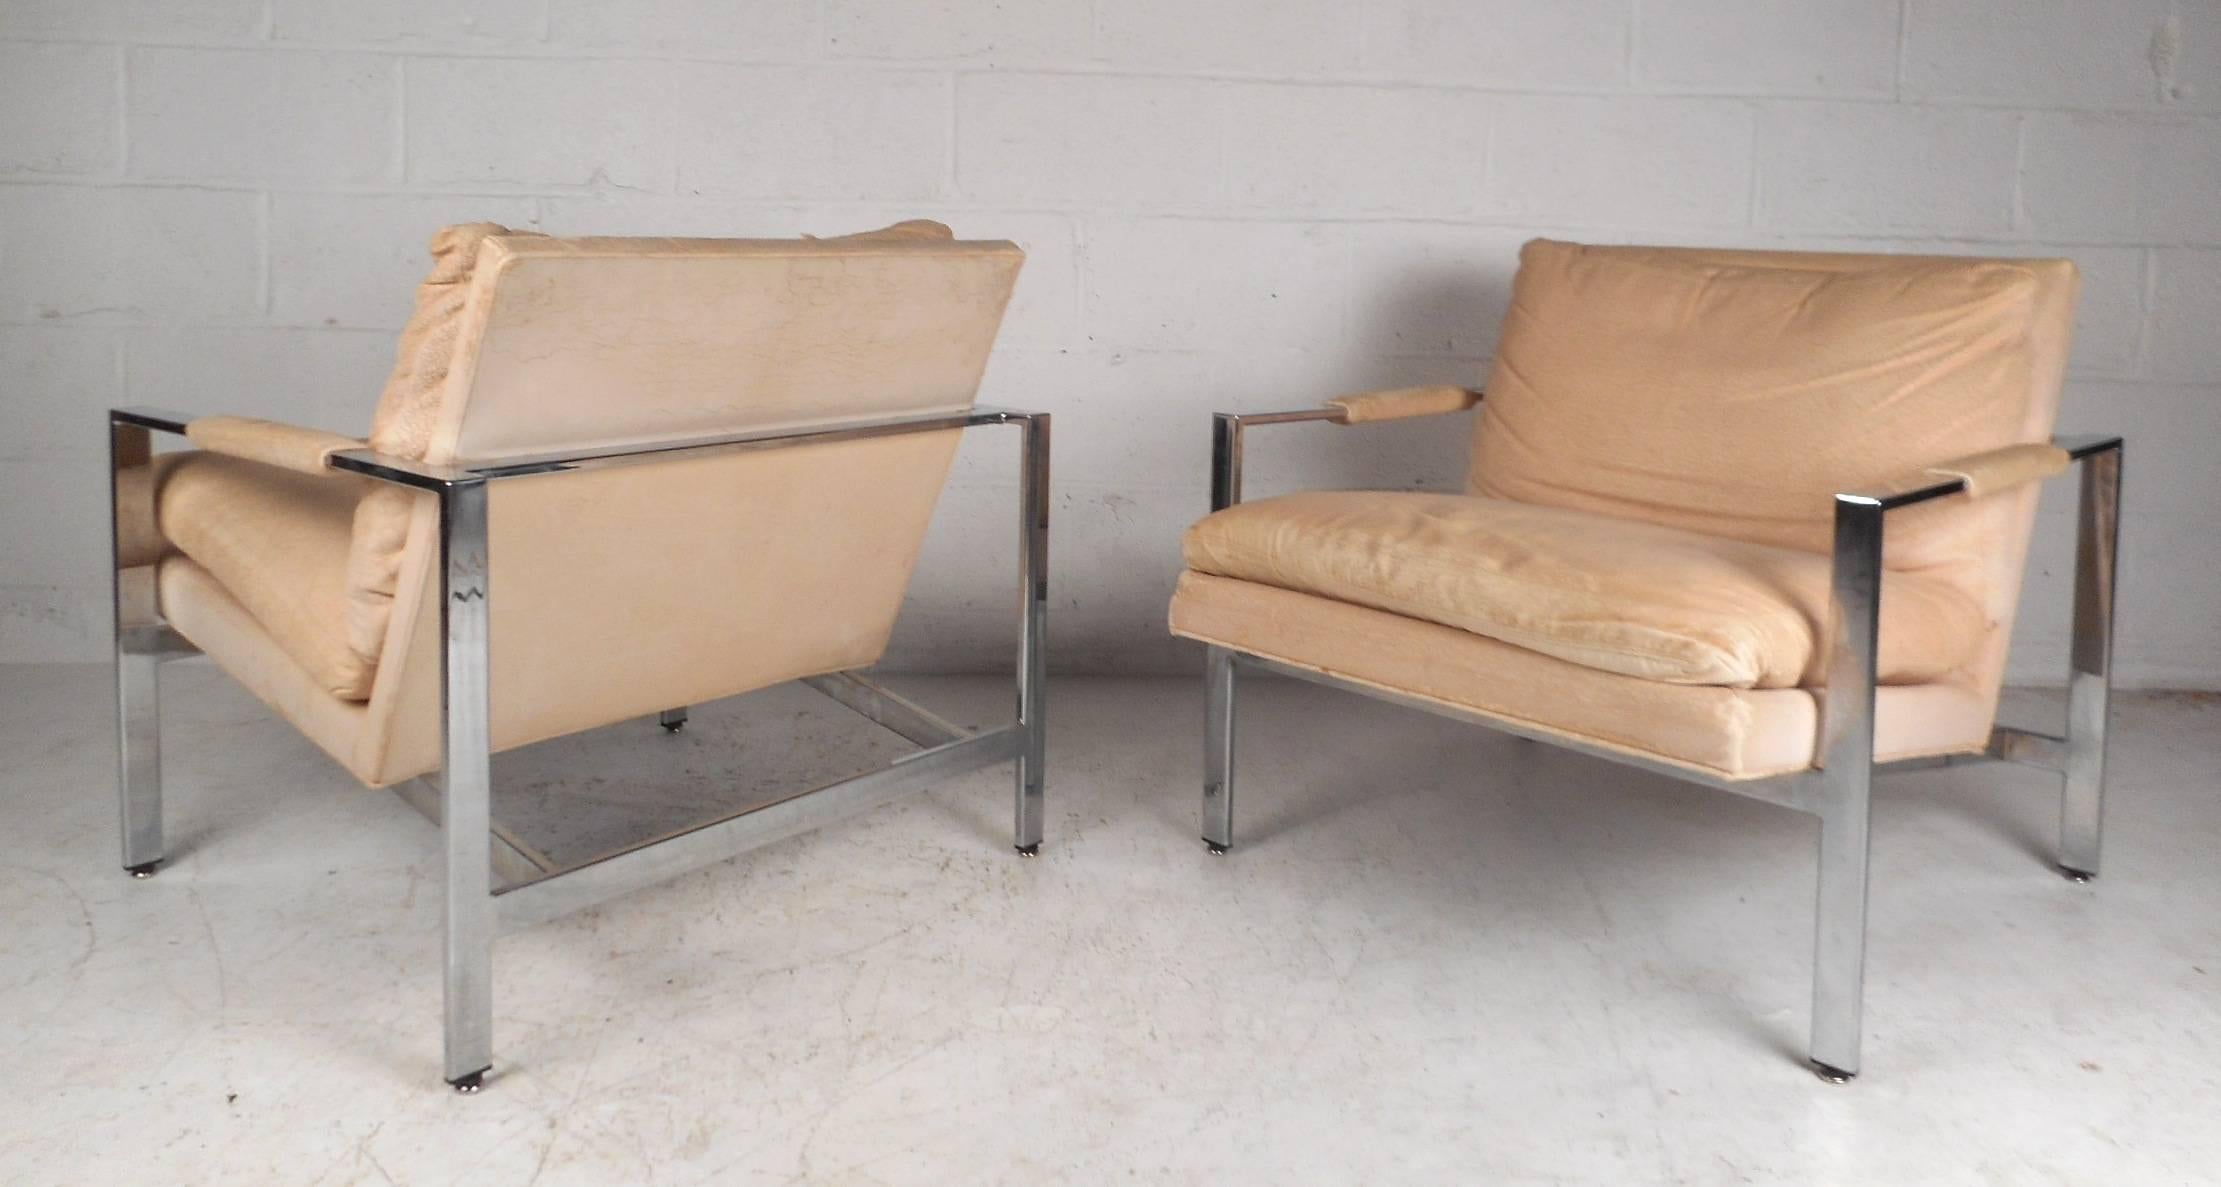 This fabulous pair of vintage modern armchairs feature a heavy flat bar chrome frame with a thick padded removable seat cushion. The wide seats, angled back rest, and stylish low arm rests ensure maximum comfort within any seating arrangement.